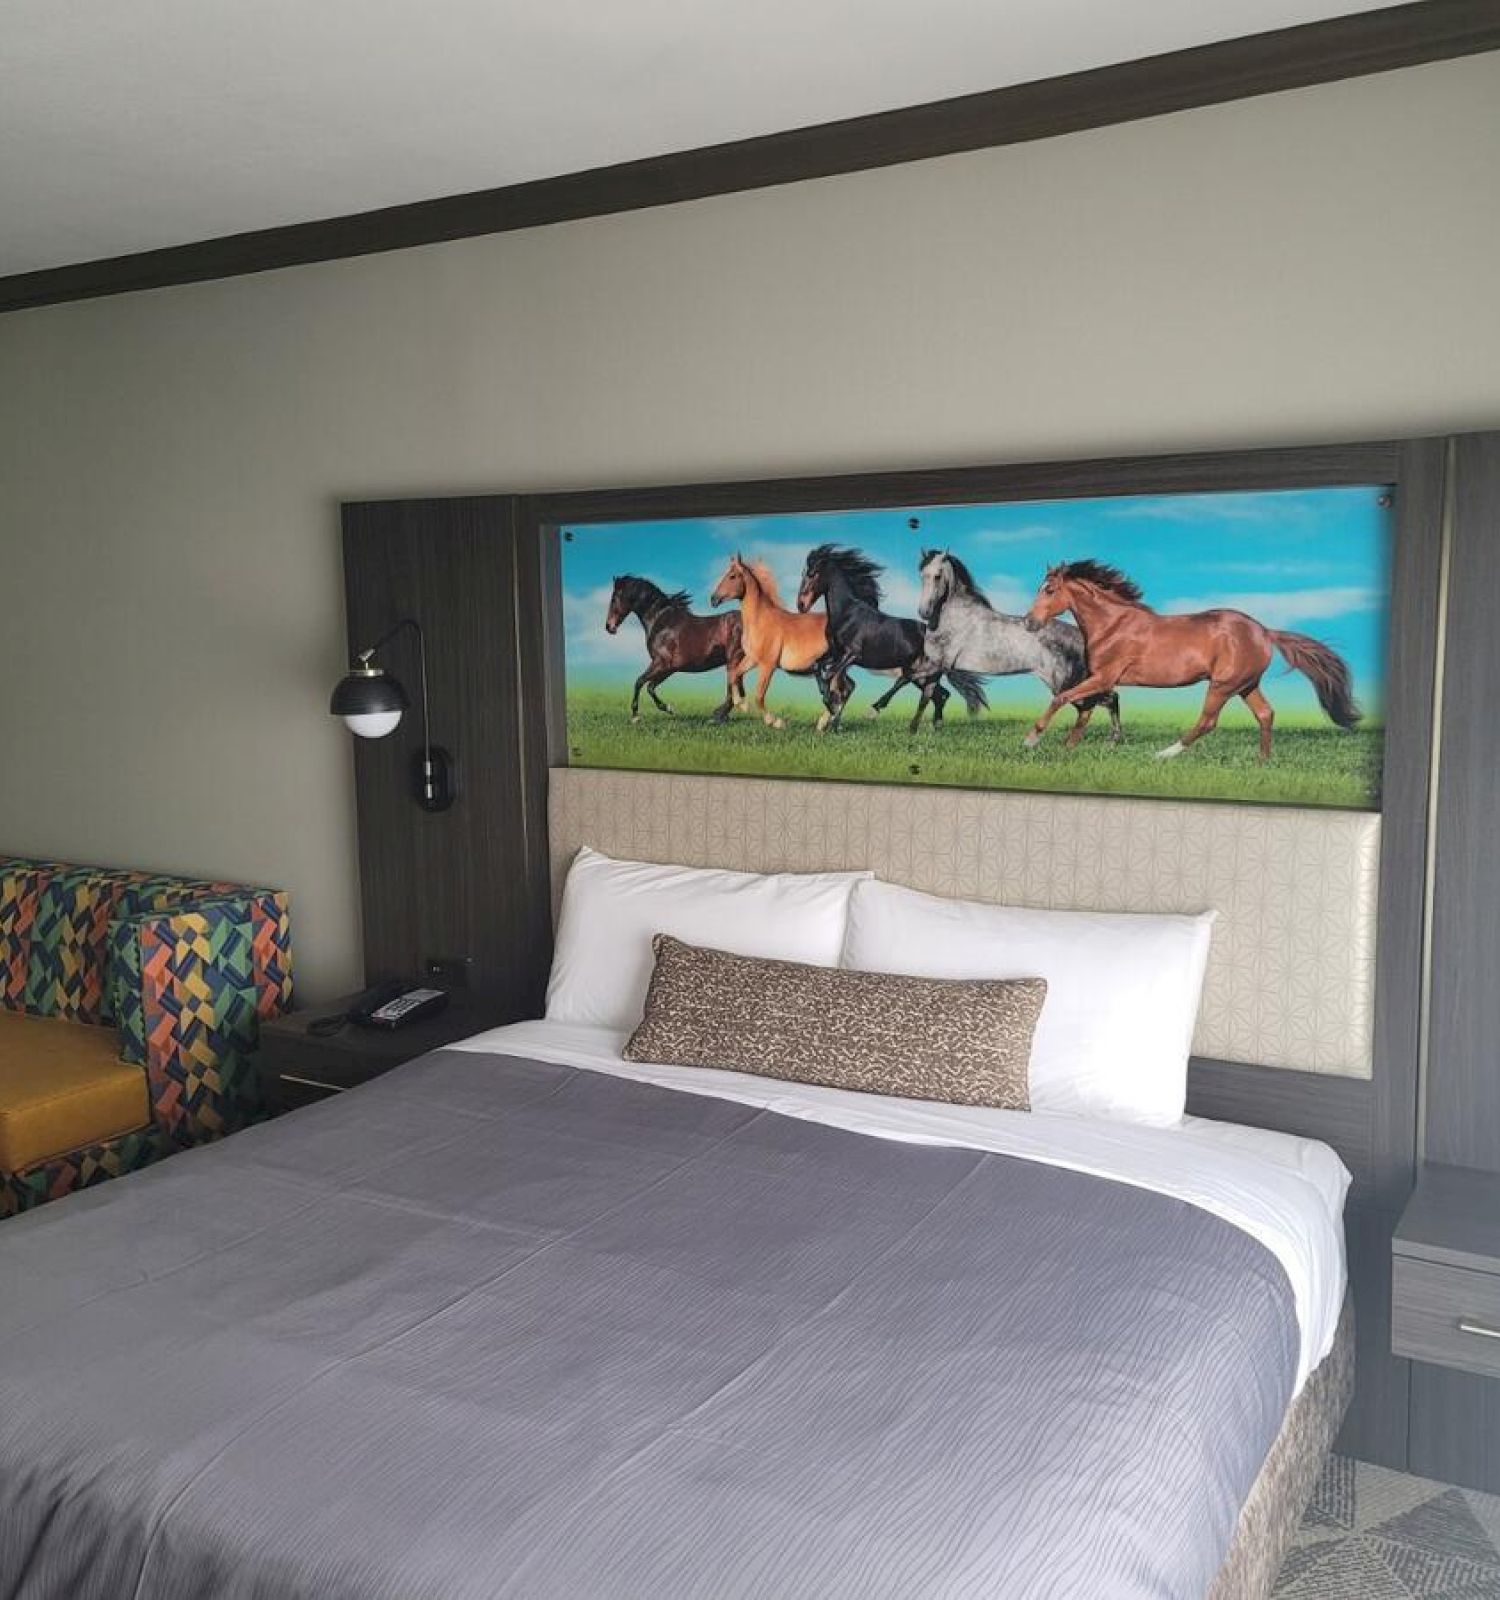 A hotel room with a large bed, a sofa, and a decorative painting of galloping horses above the bed. Two bedside lamps are present.